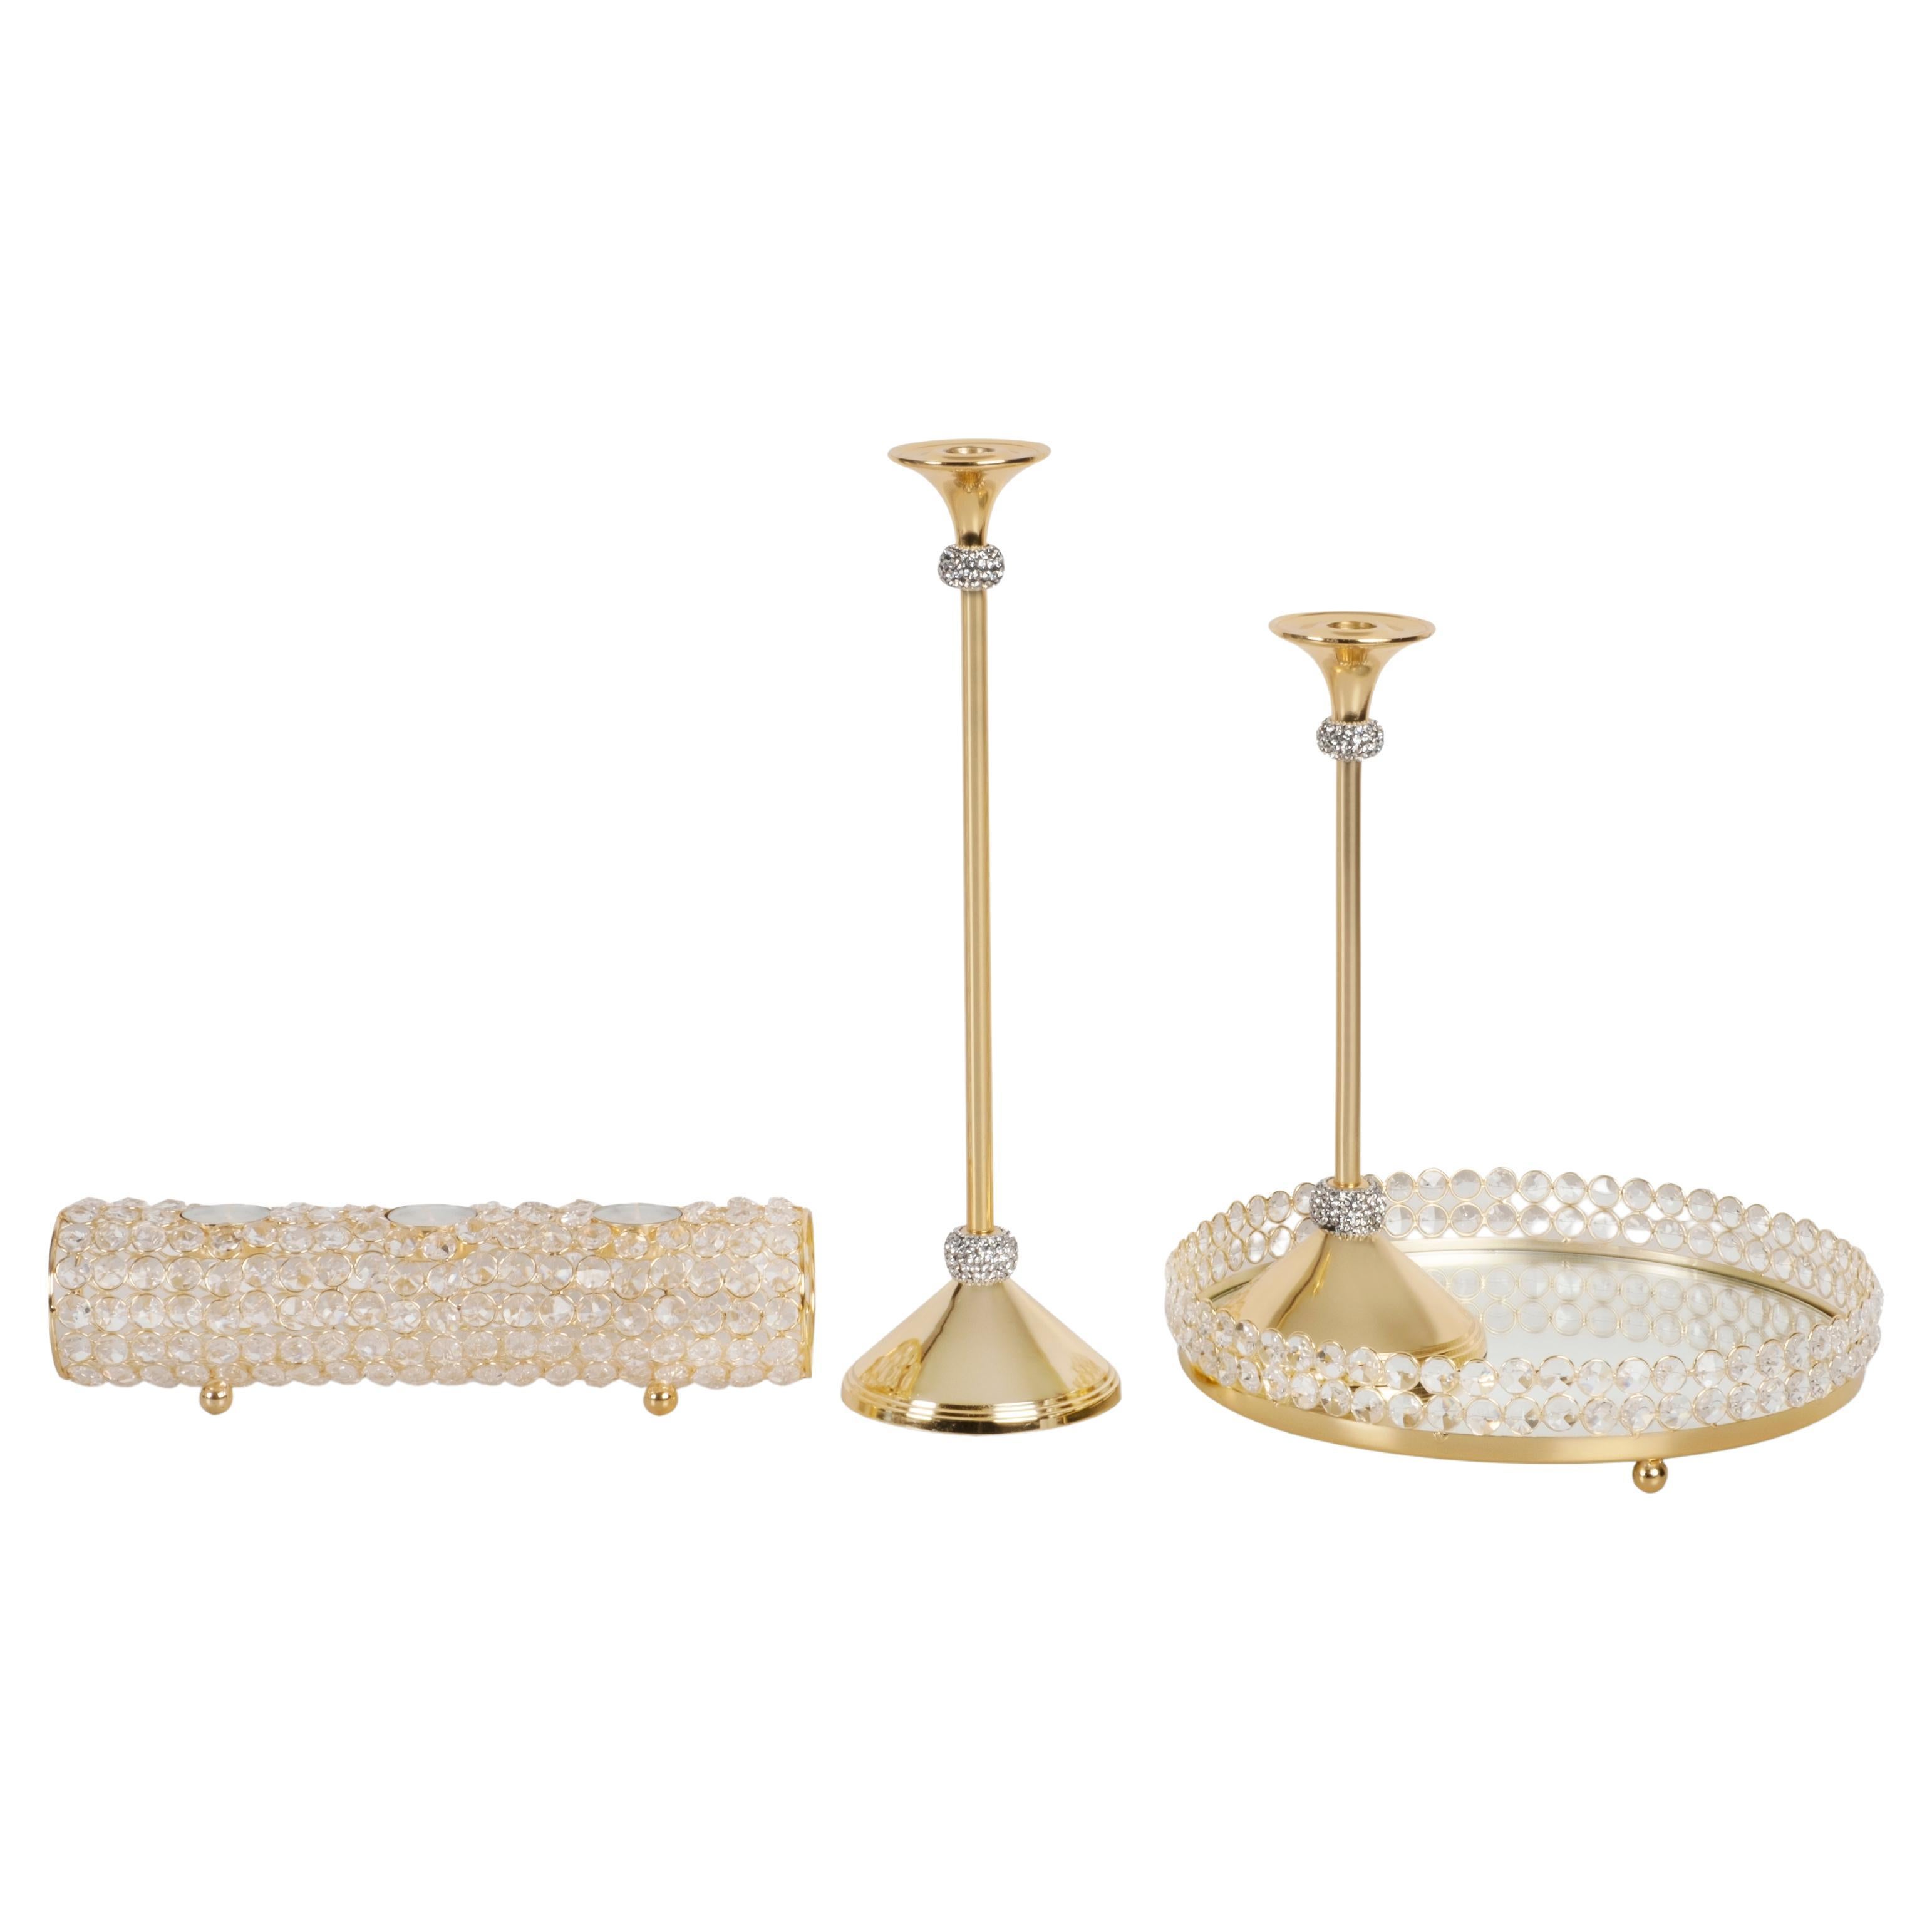 Decorative Candleholders & Tray, Golden Nickel, Handmade by Lusitanus Home For Sale